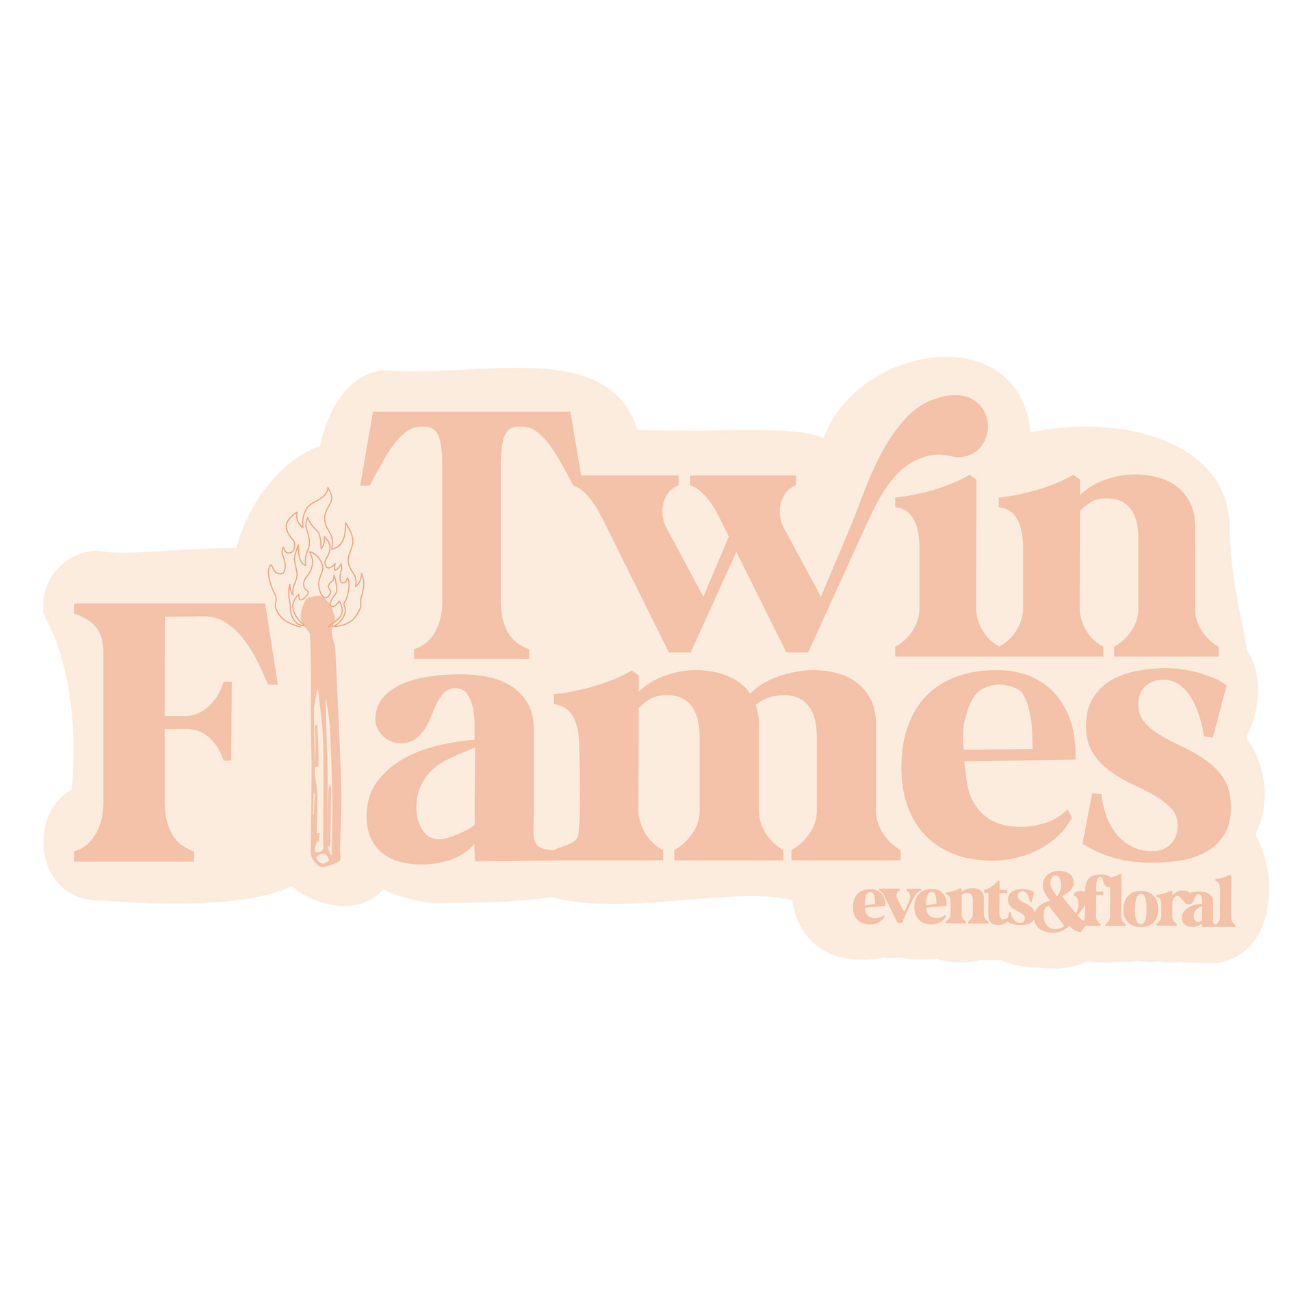 TWIN FLAMES EVENTS